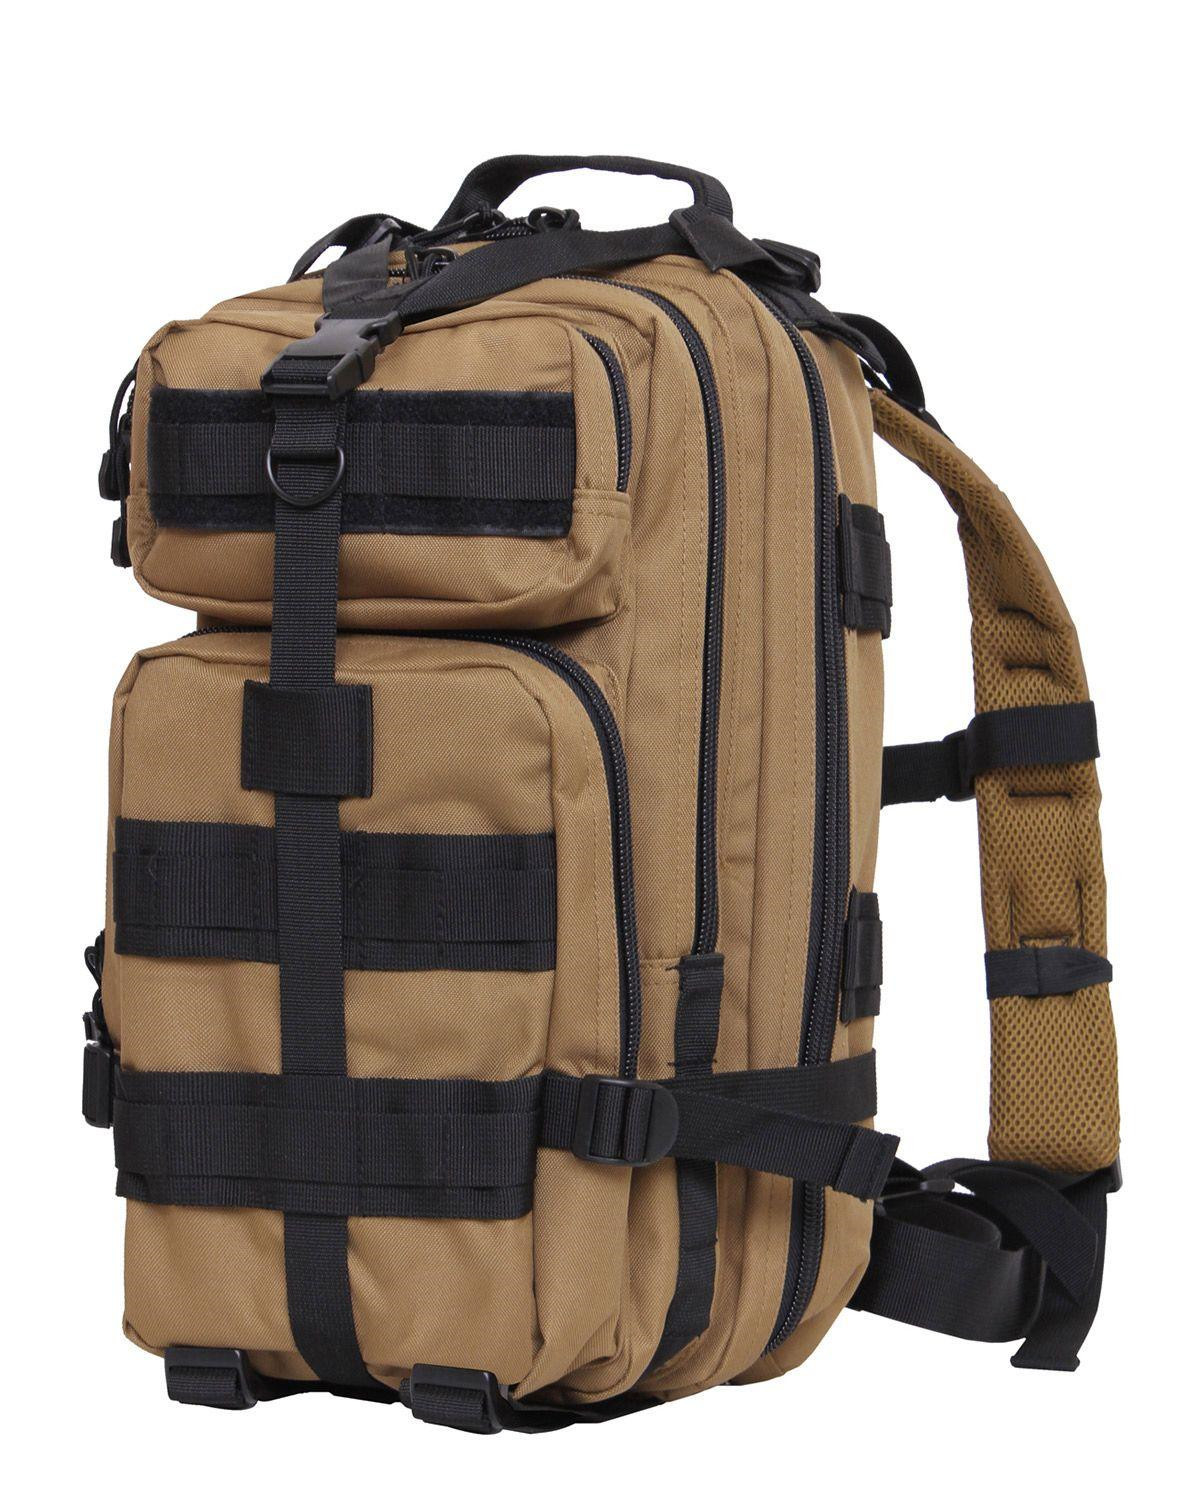 Rothco Transport Rygsæk m. MOLLE - 25 liter (Coyote Brun / Sort, One Size)